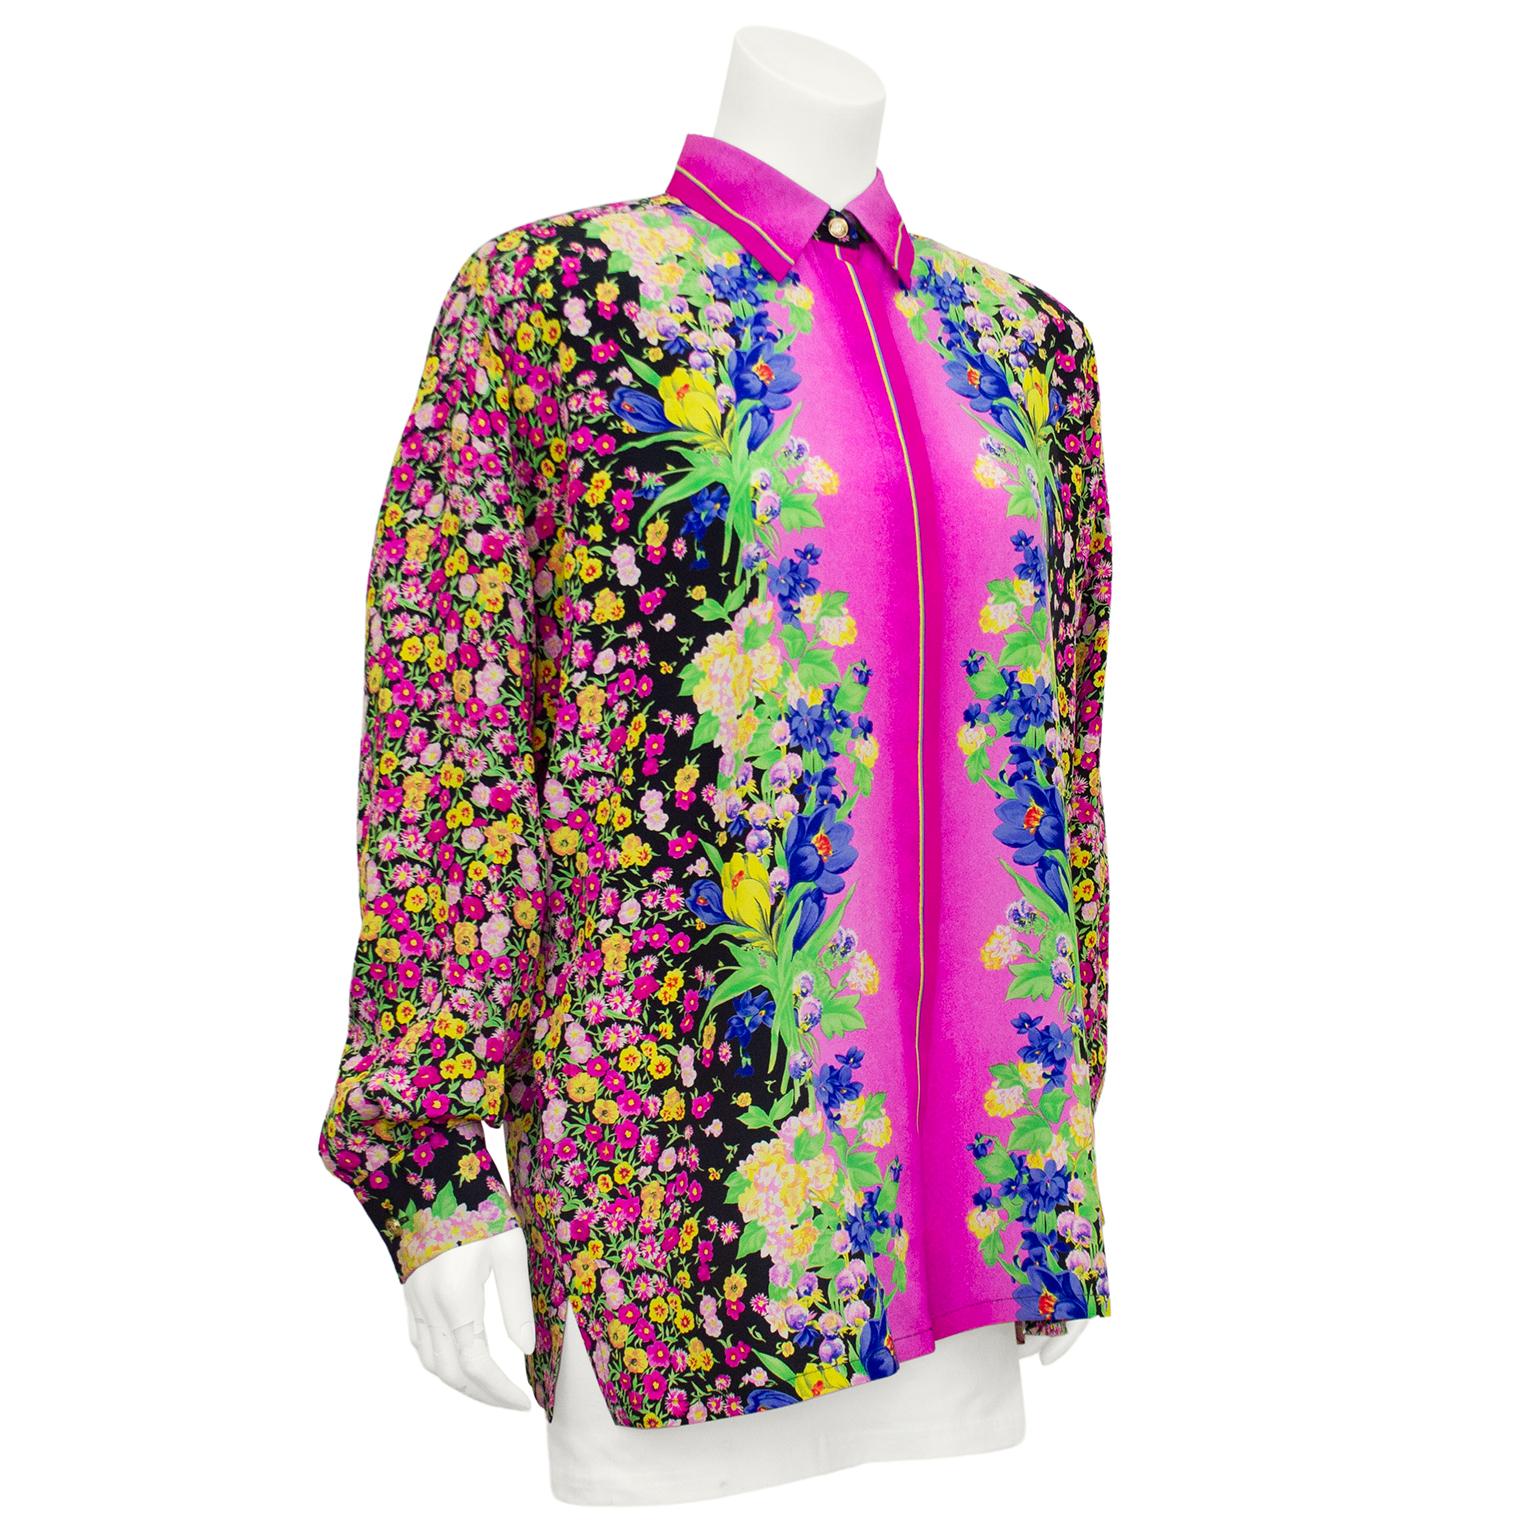 Bright and interesting GV Versatile Couture silk blouse. Allover mixed florals. Back, sides and arms are a pink and yellow floral chintz on black background. Center features green, blue and yellow mixed flowers on a bright magenta ombre background.